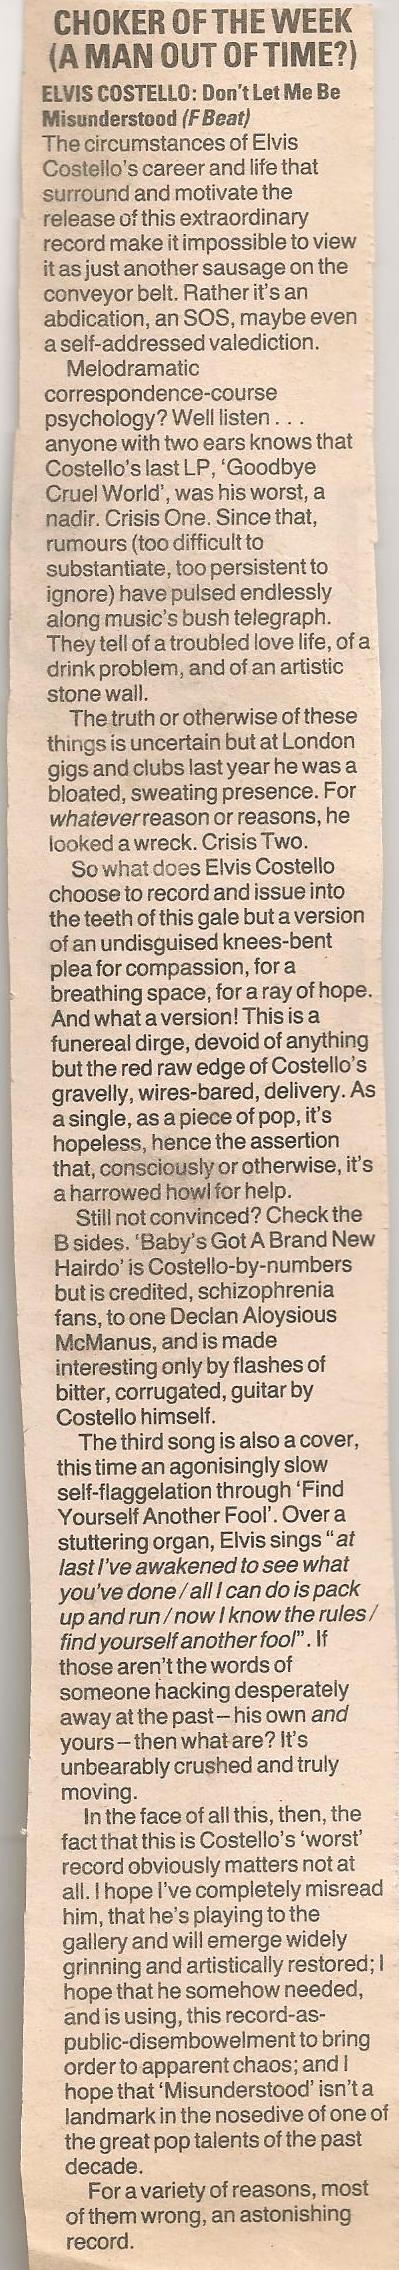 Danny Kelly's NME review of 'Misunderstood'